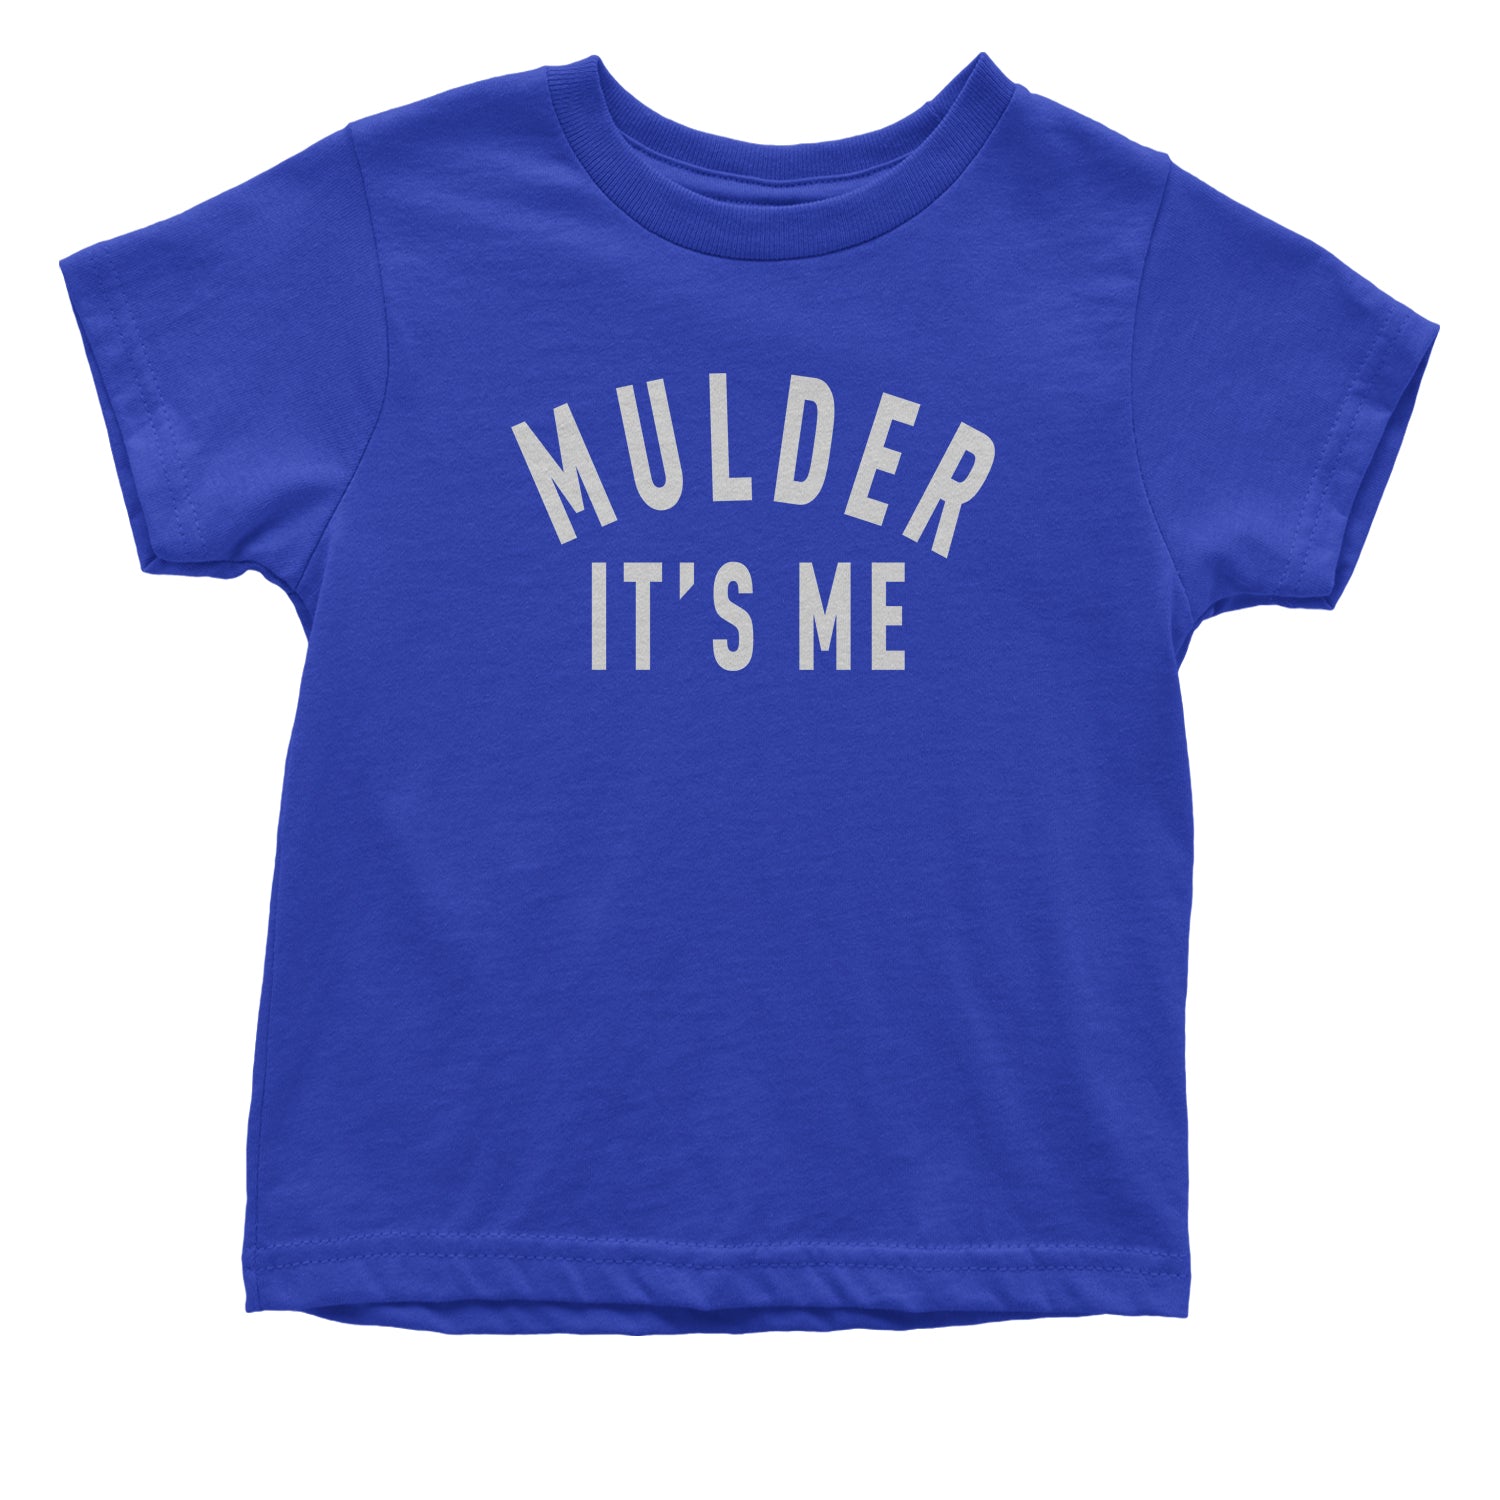 Mulder, It's Me Toddler T-Shirt 51, area, believe, files, is, mulder, out, scully, the, there, truth, x, xfiles by Expression Tees